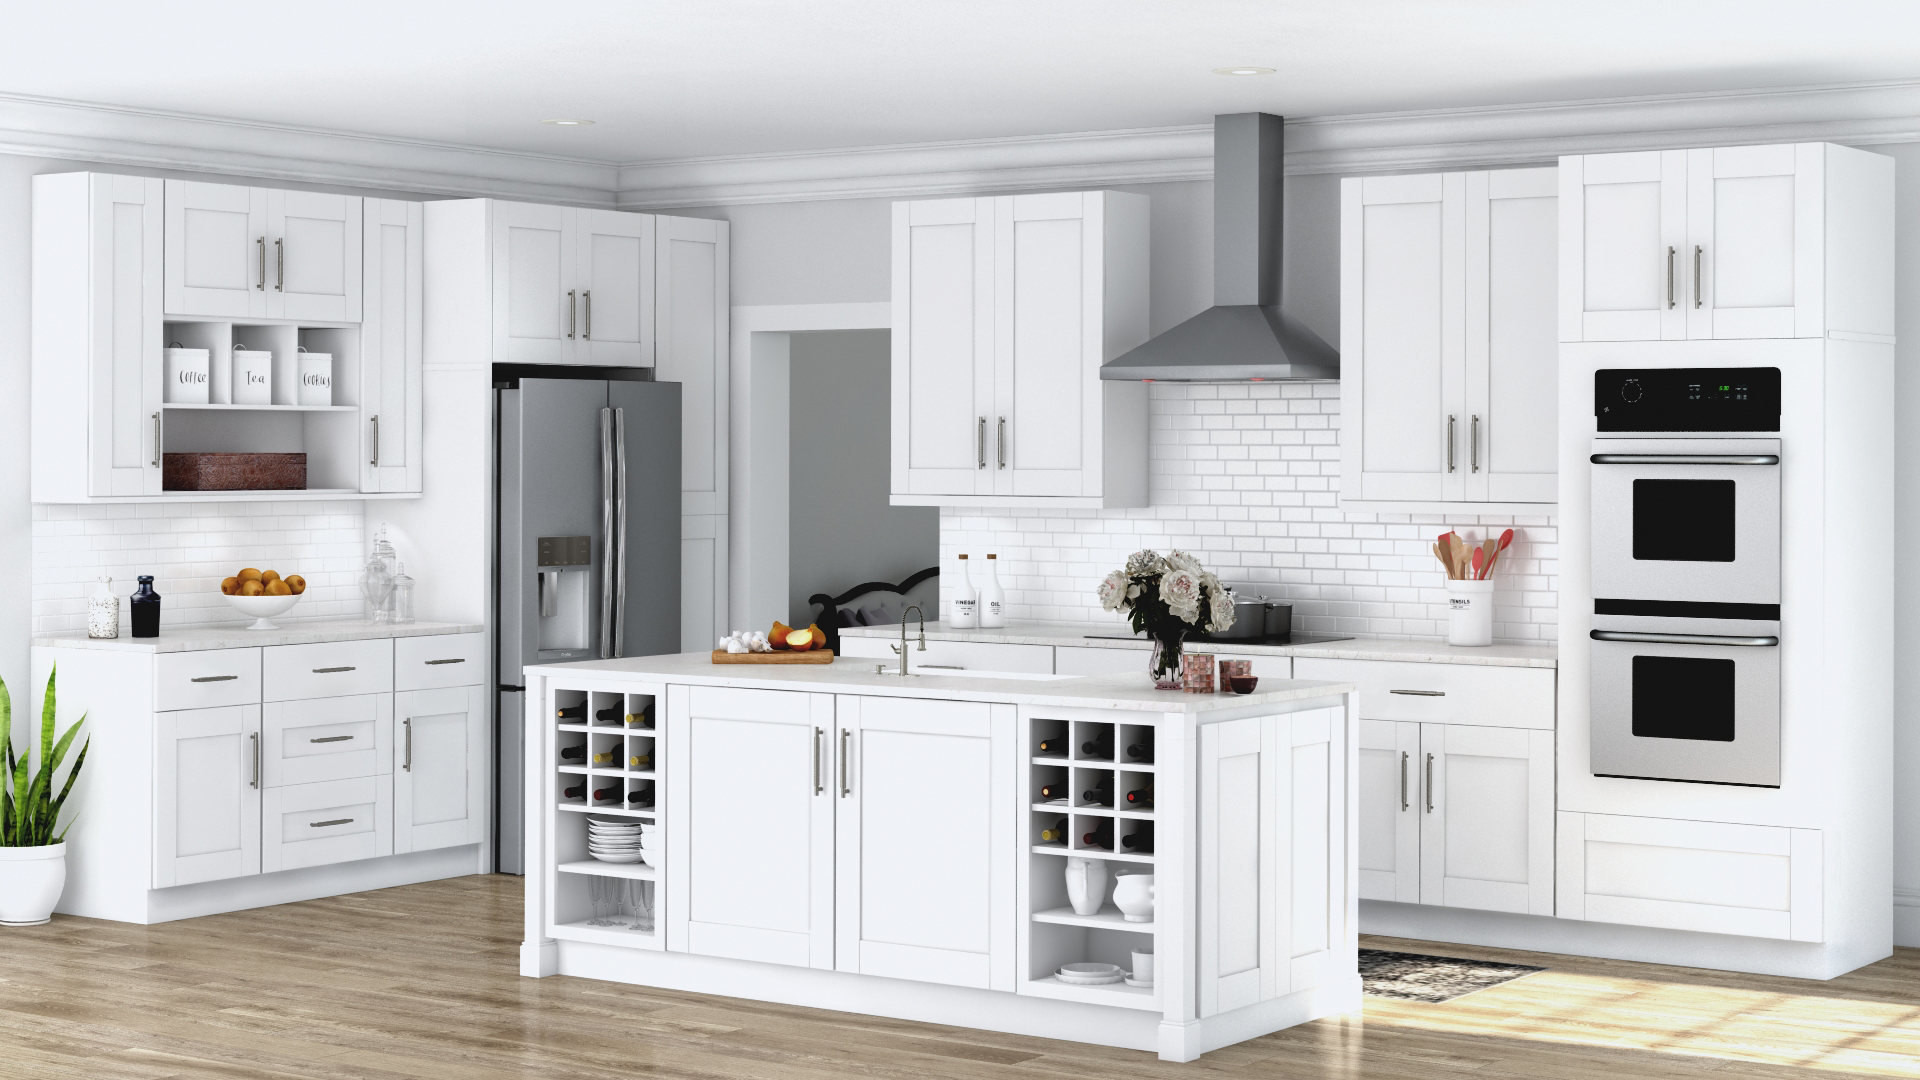 Kitchen Cabinets Doors Home Depot
 Shaker Cabinet Accessories in White – Kitchen – The Home Depot